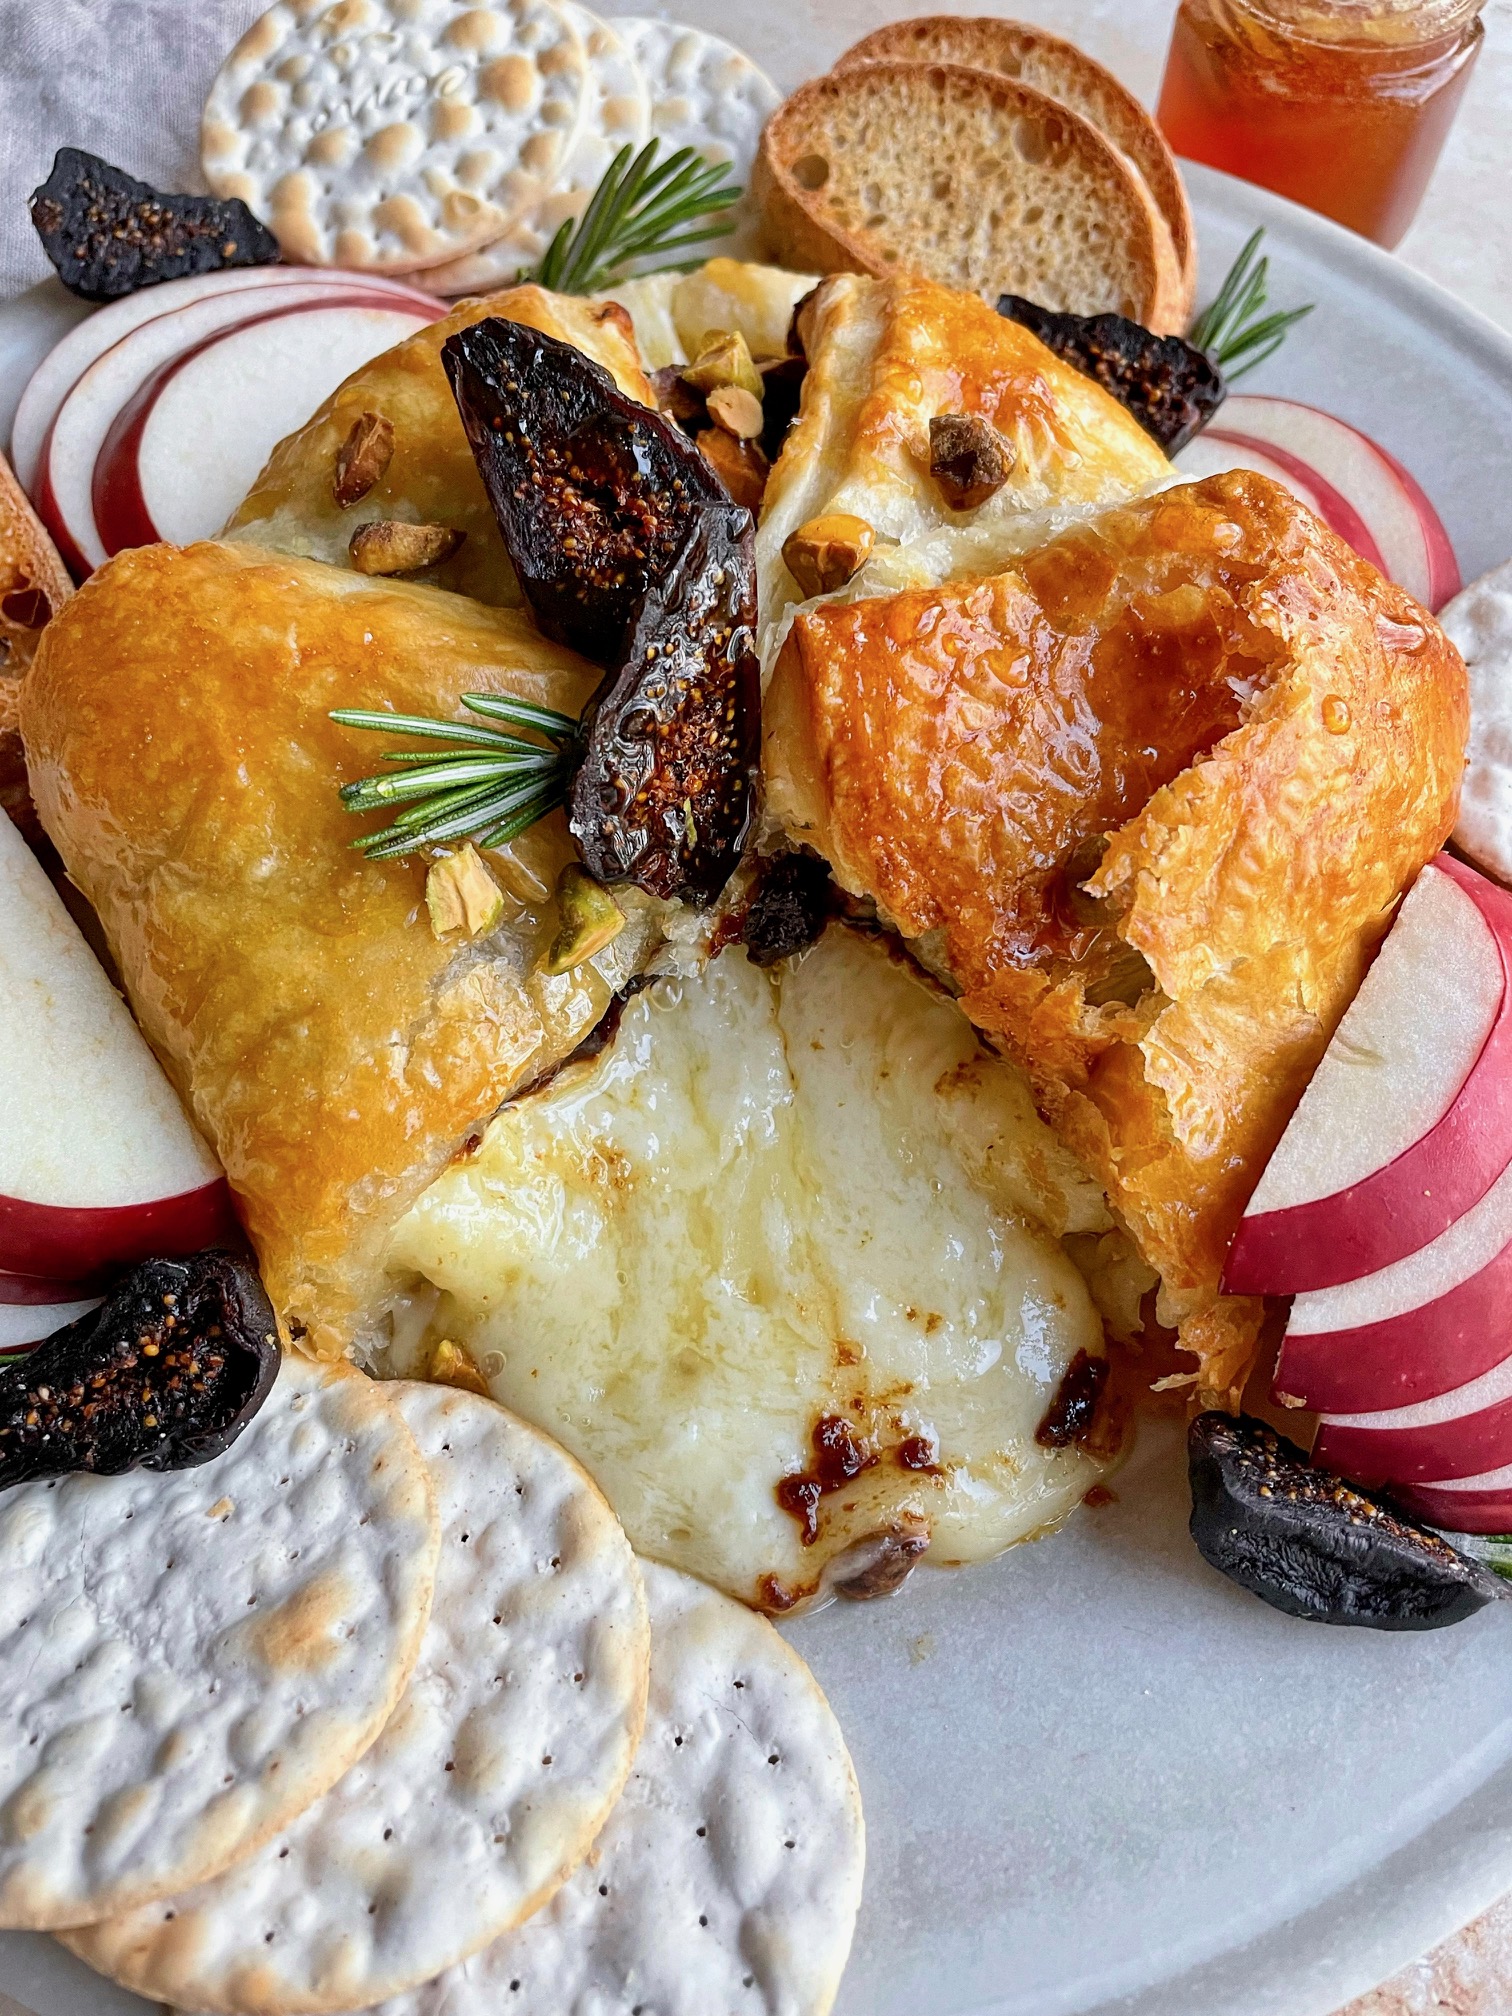 baked brie with a slice cut out to show the melty brie inside.